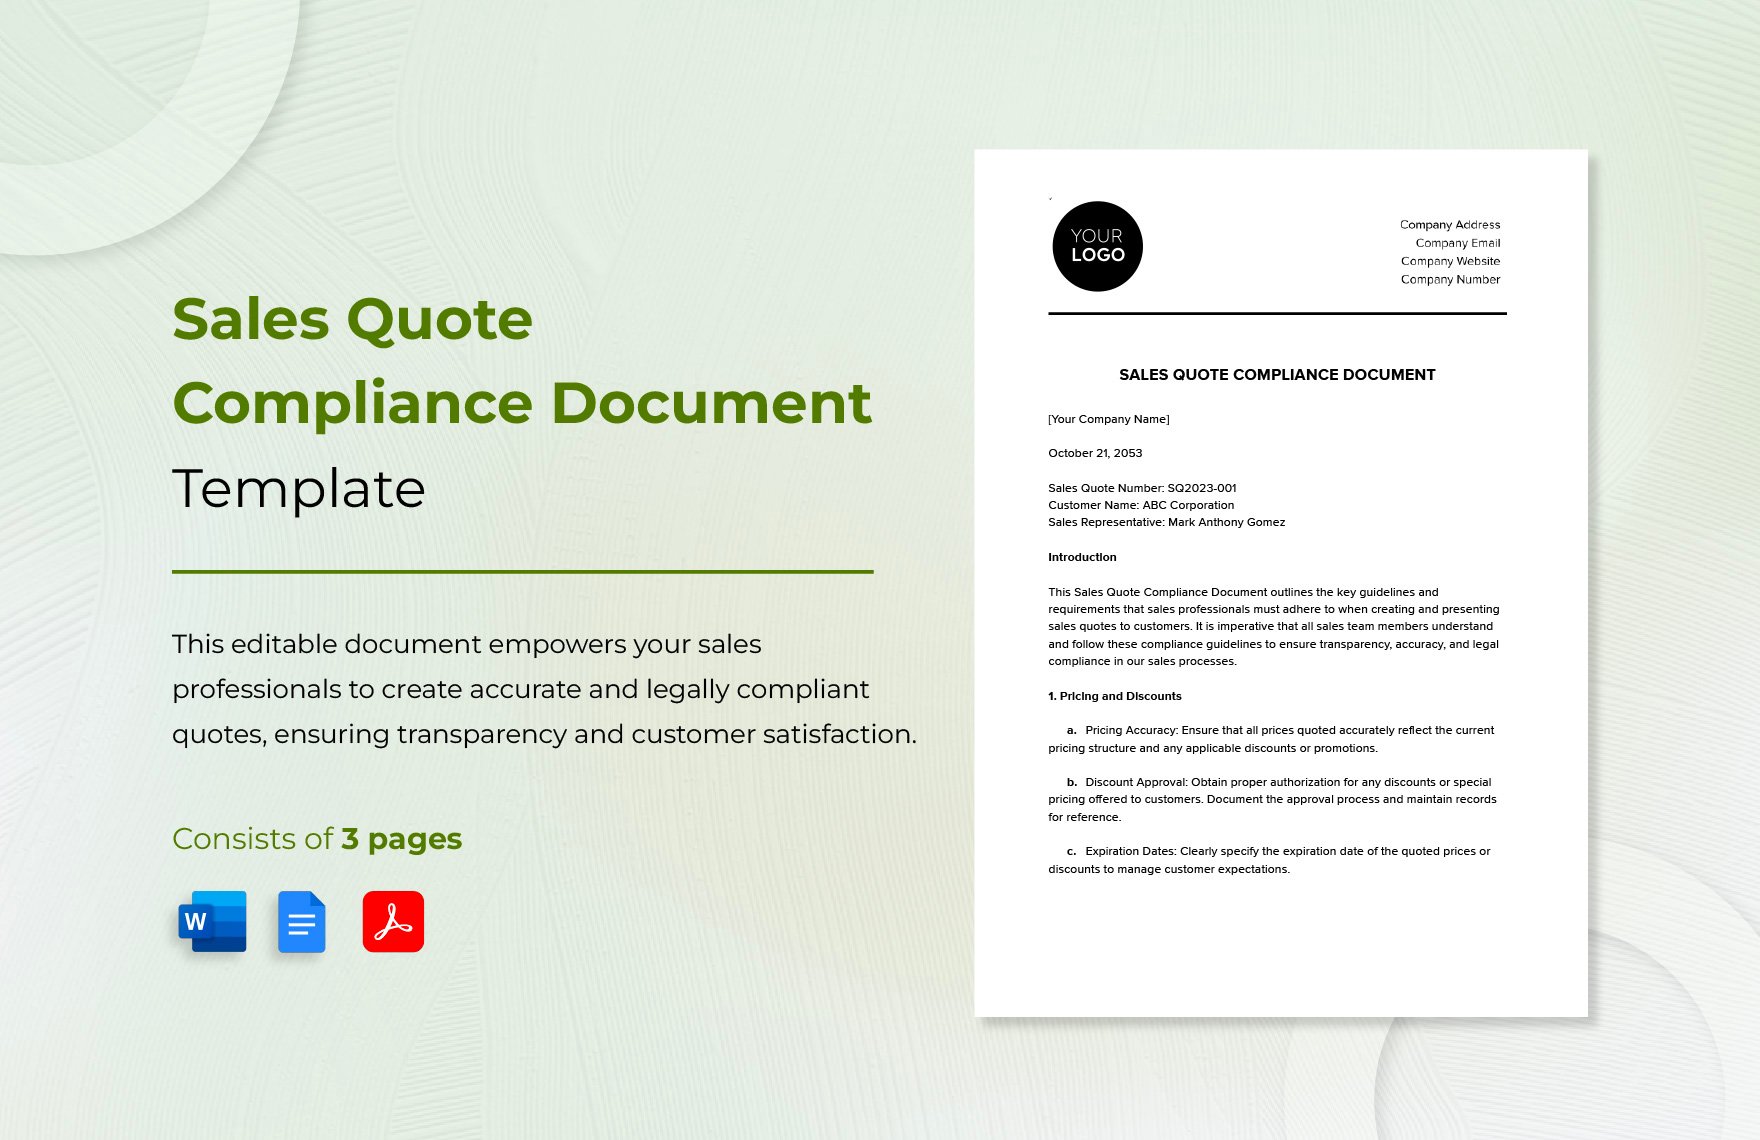 Sales Quote Compliance Document Template in Word, Google Docs, PDF